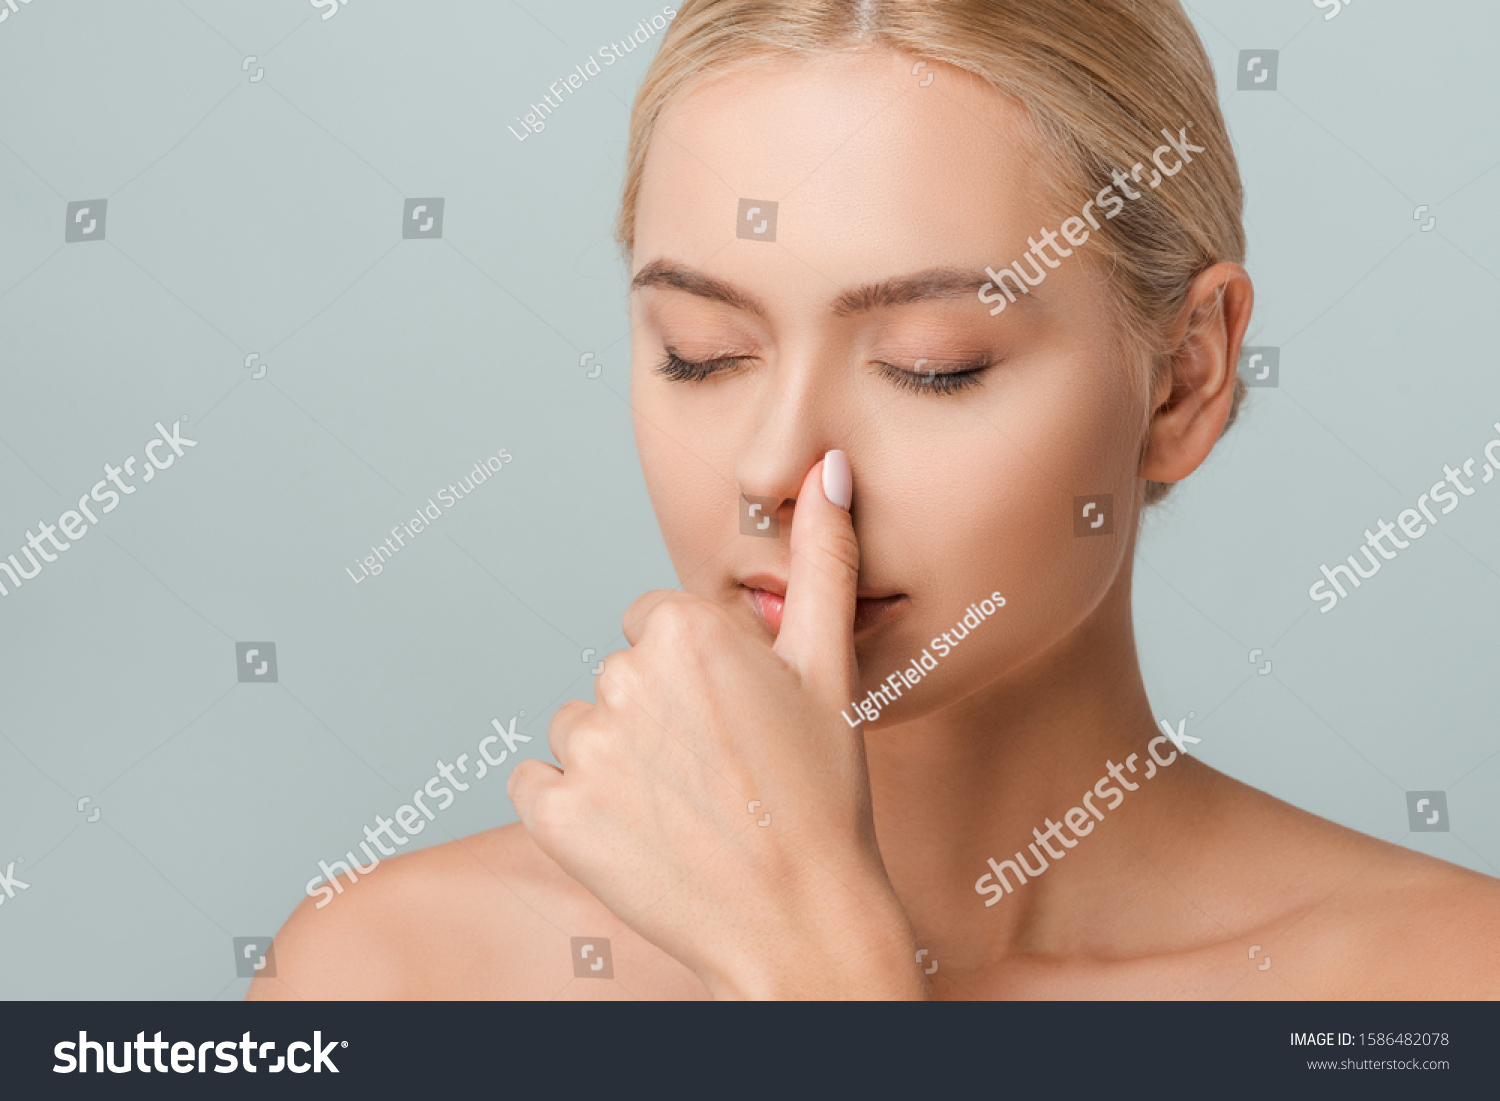 Attractive Naked Woman Touching Nose Isolated Stock Photo Shutterstock